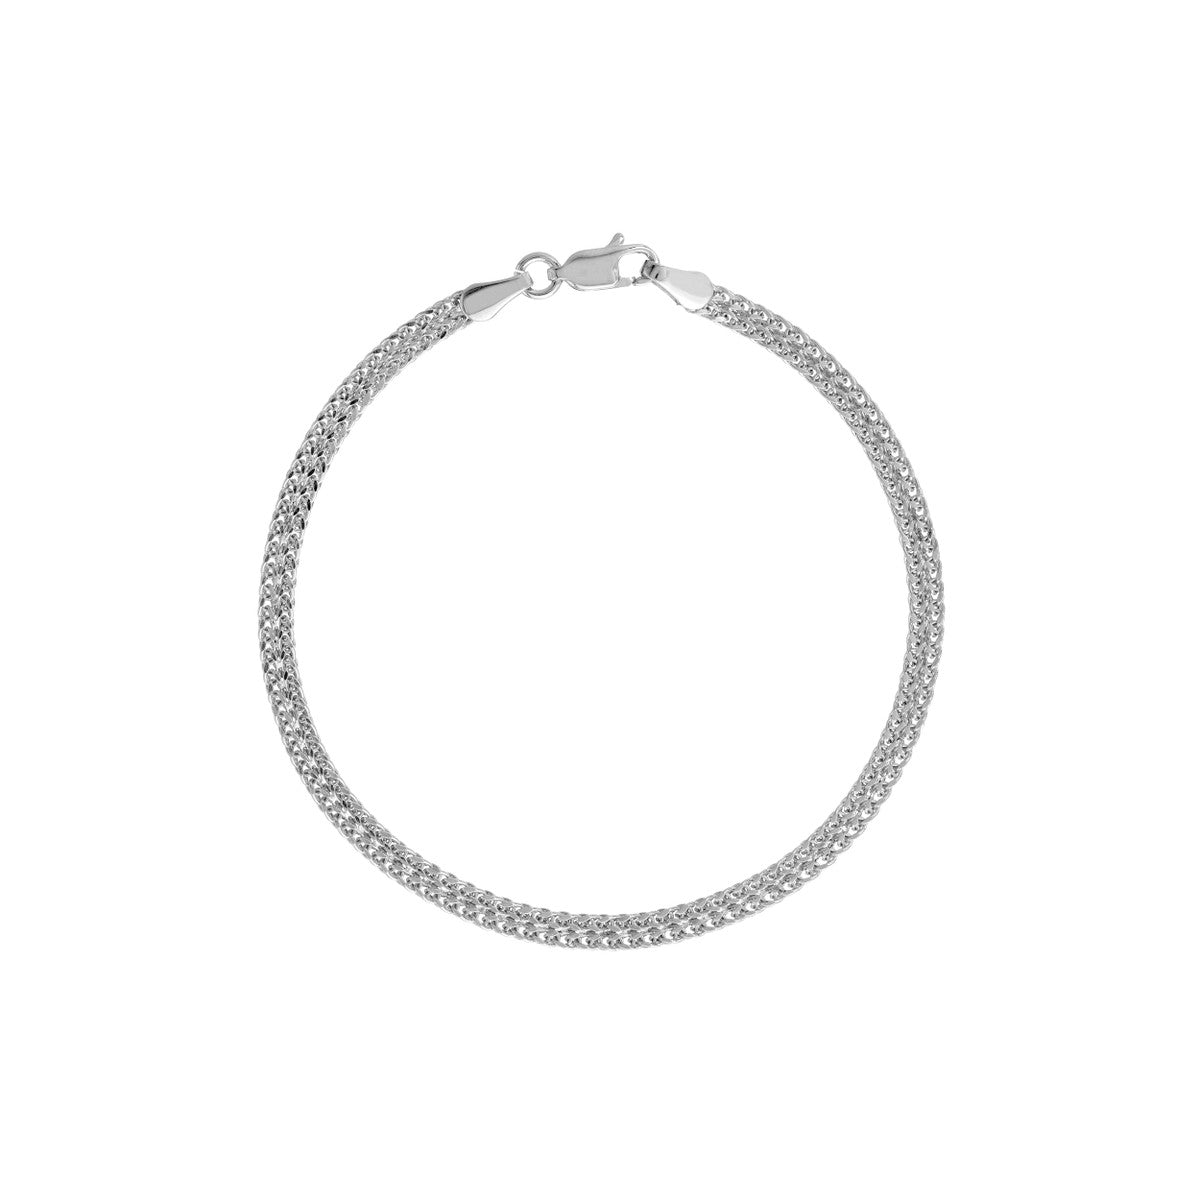 Gold Hollow Wheat Chain Bracelet in 14k White Gold